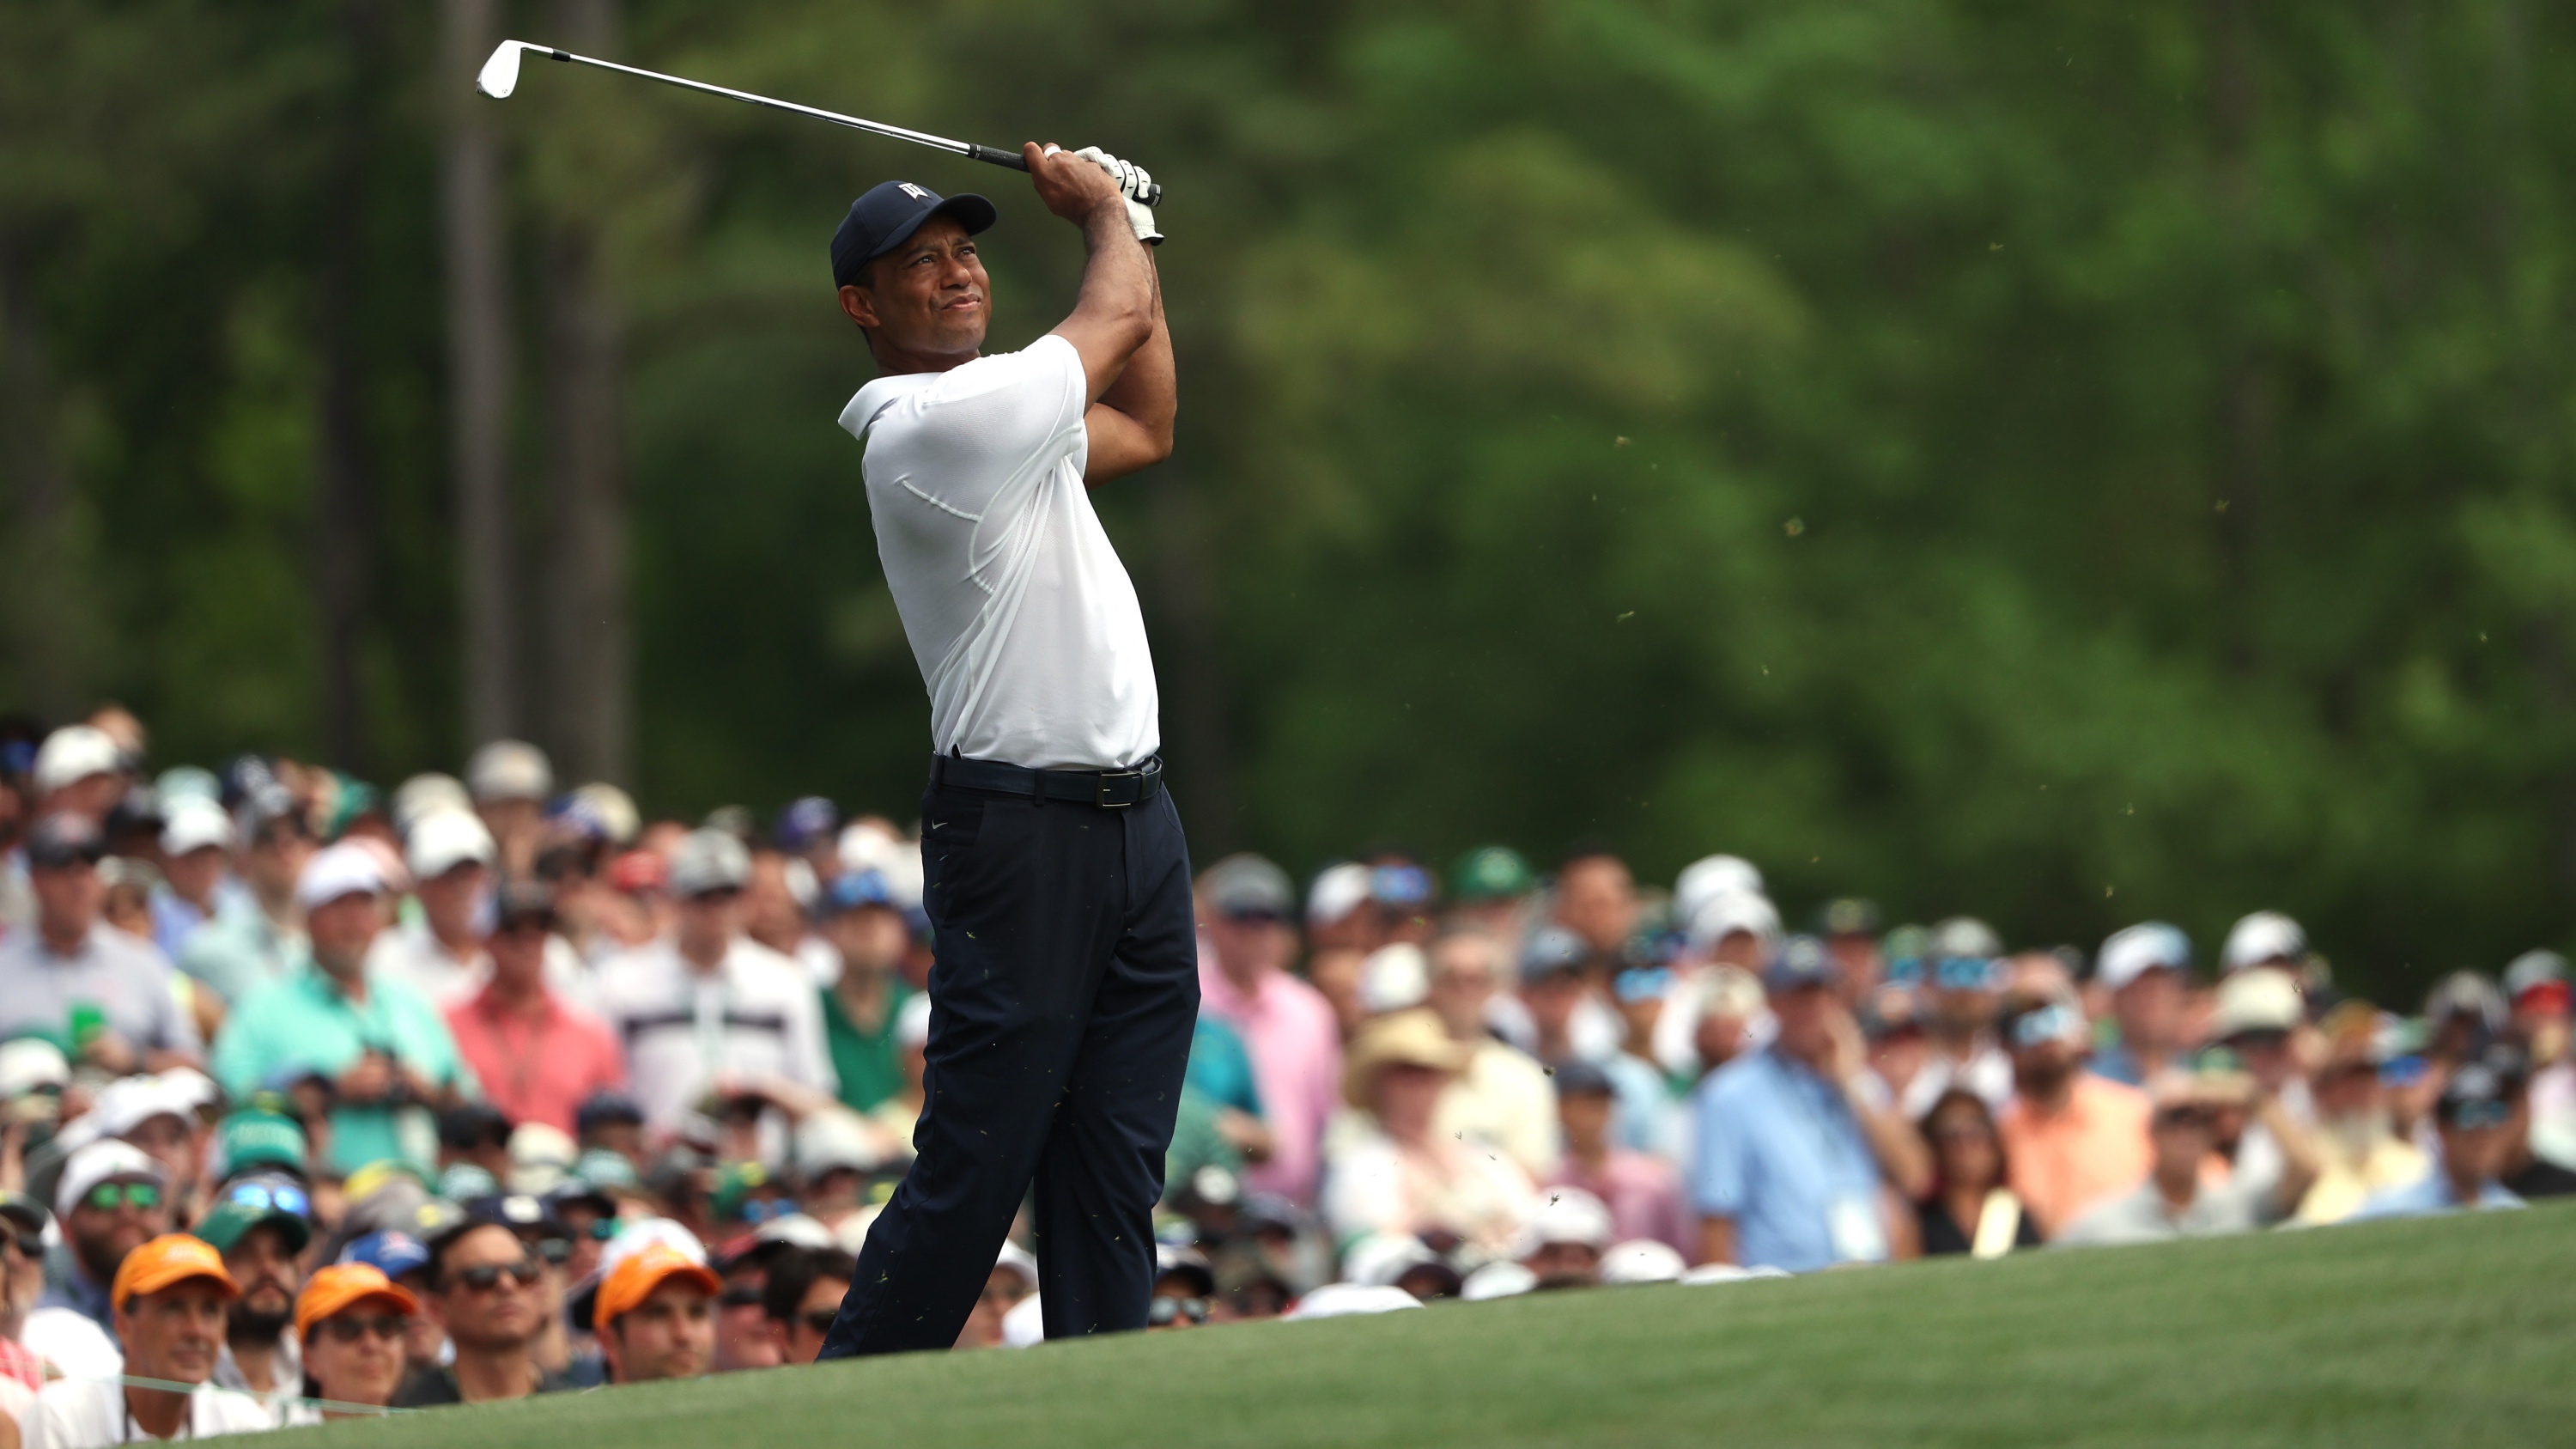 Tiger Woods at The Masters hitting from a bunker at Augusta National